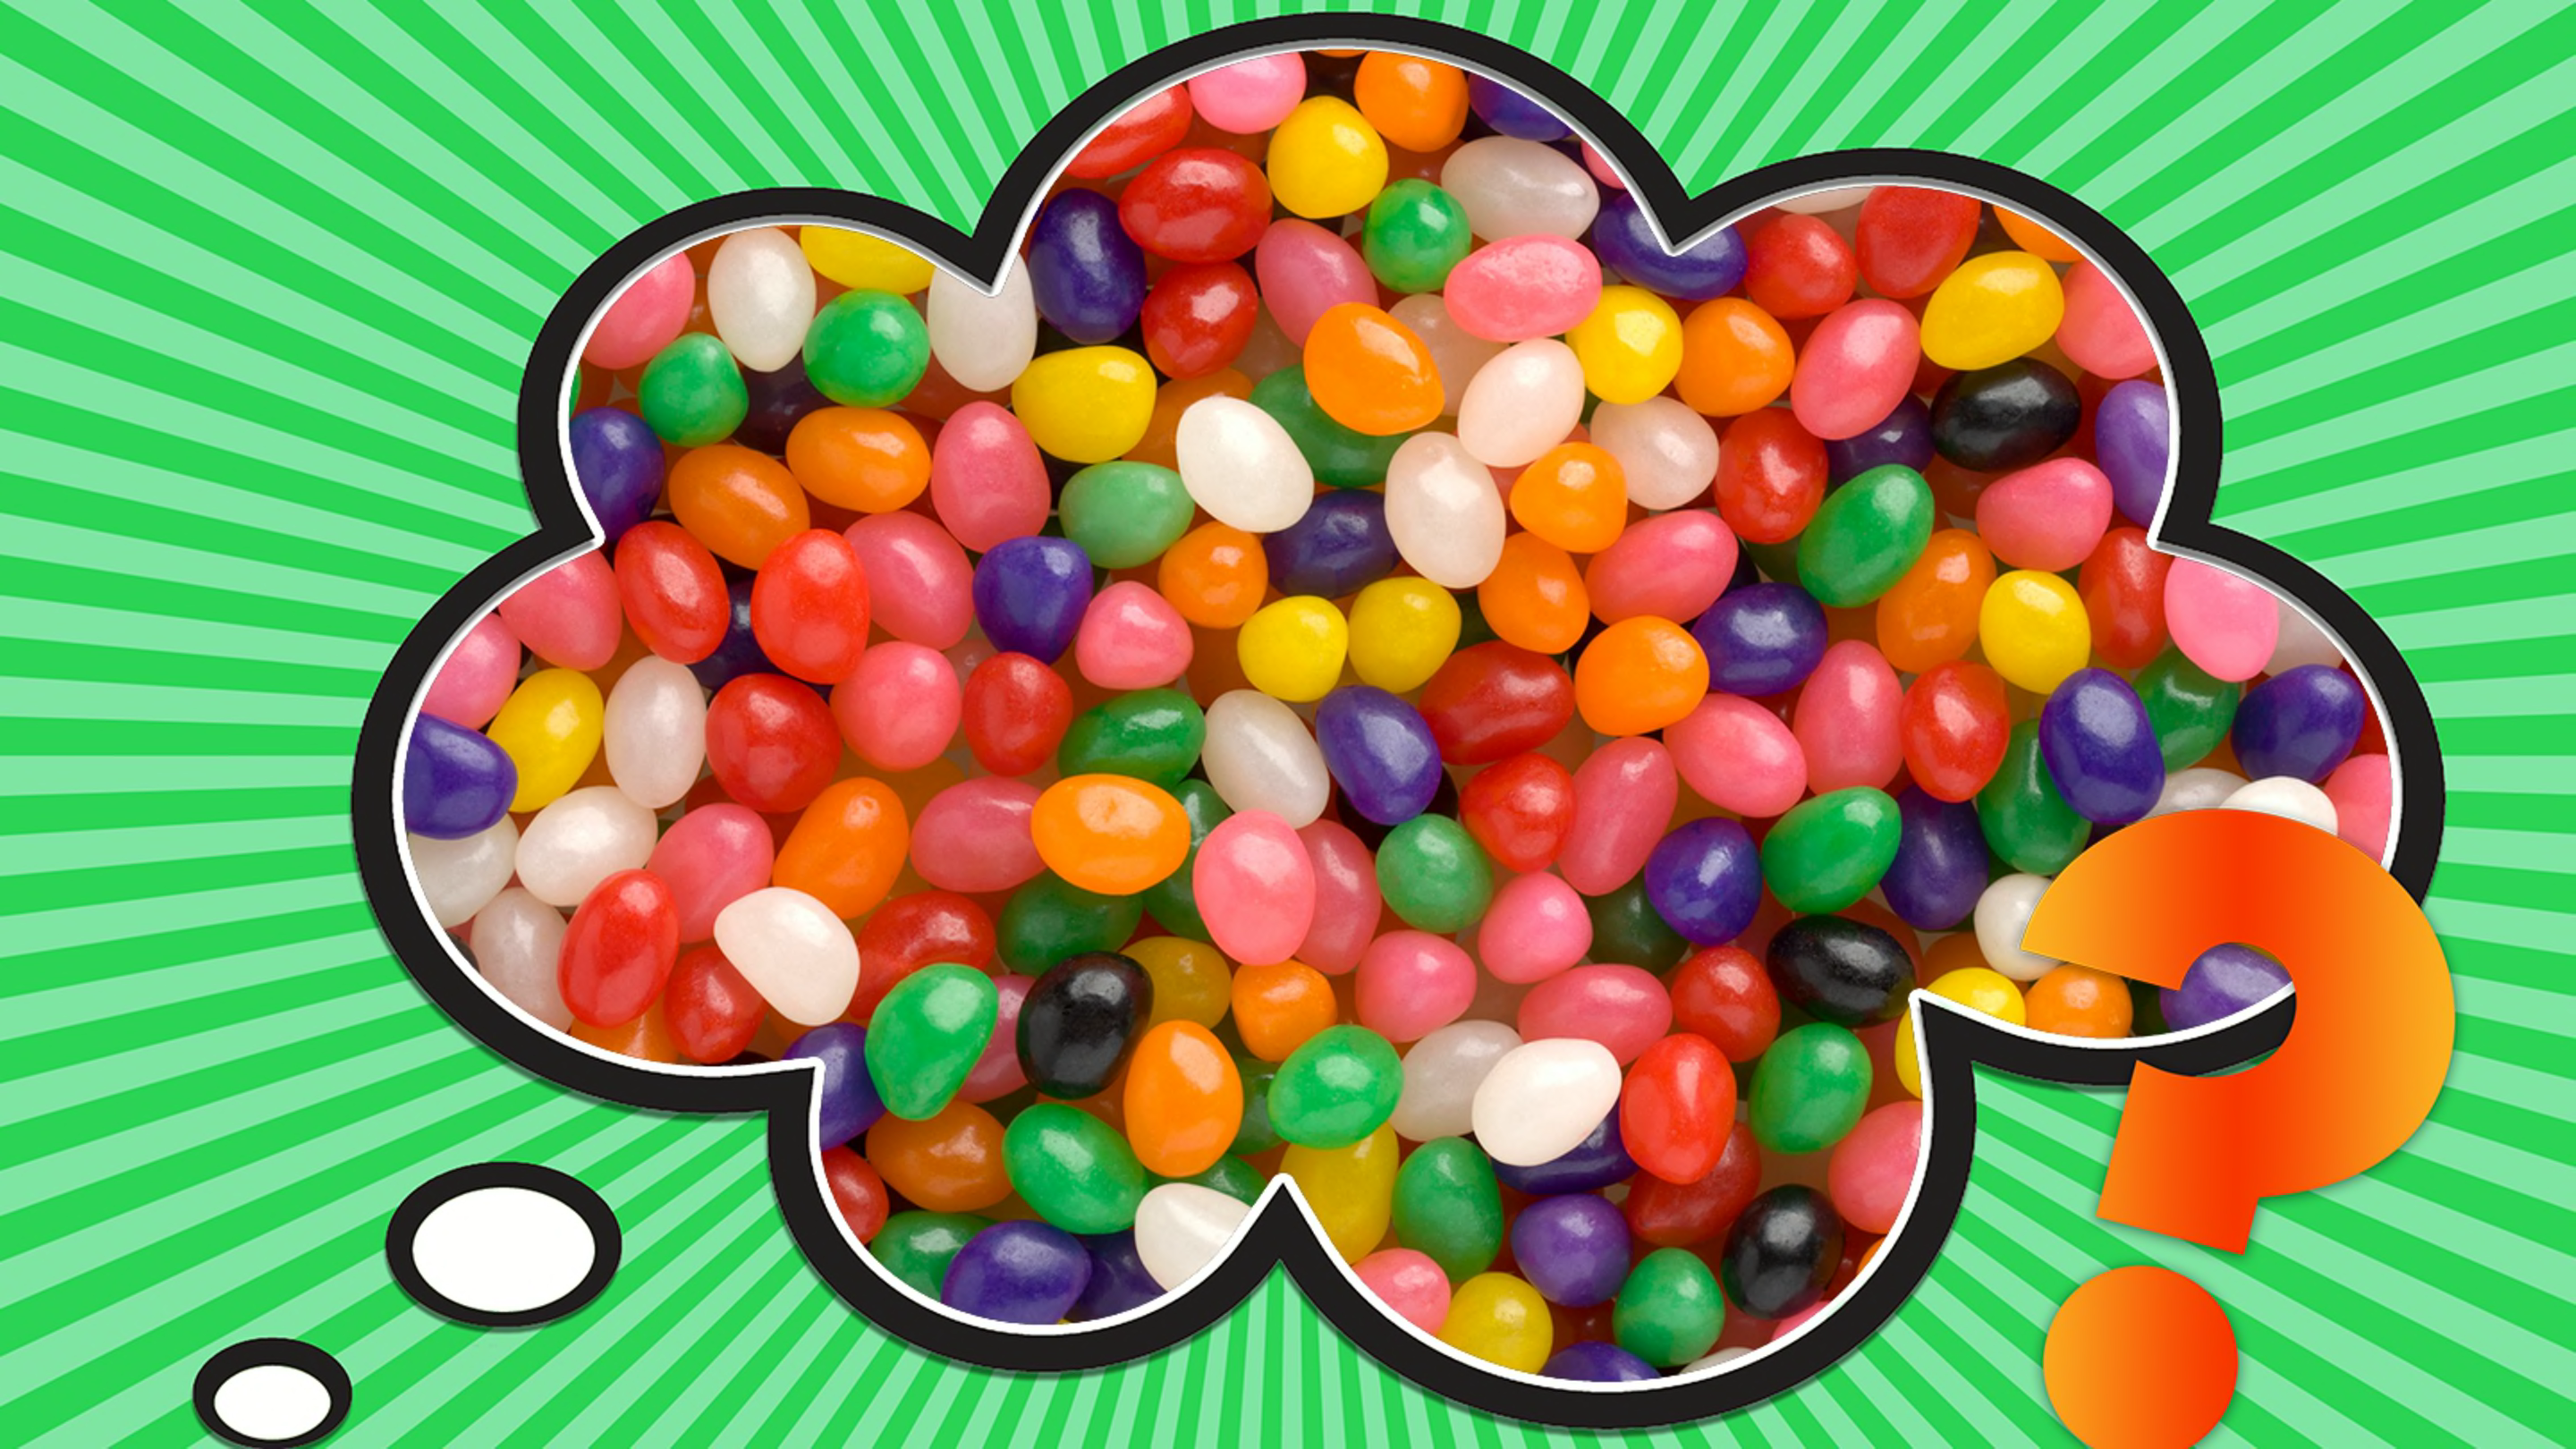 How Did Jelly Beans Become an Easter Candy?